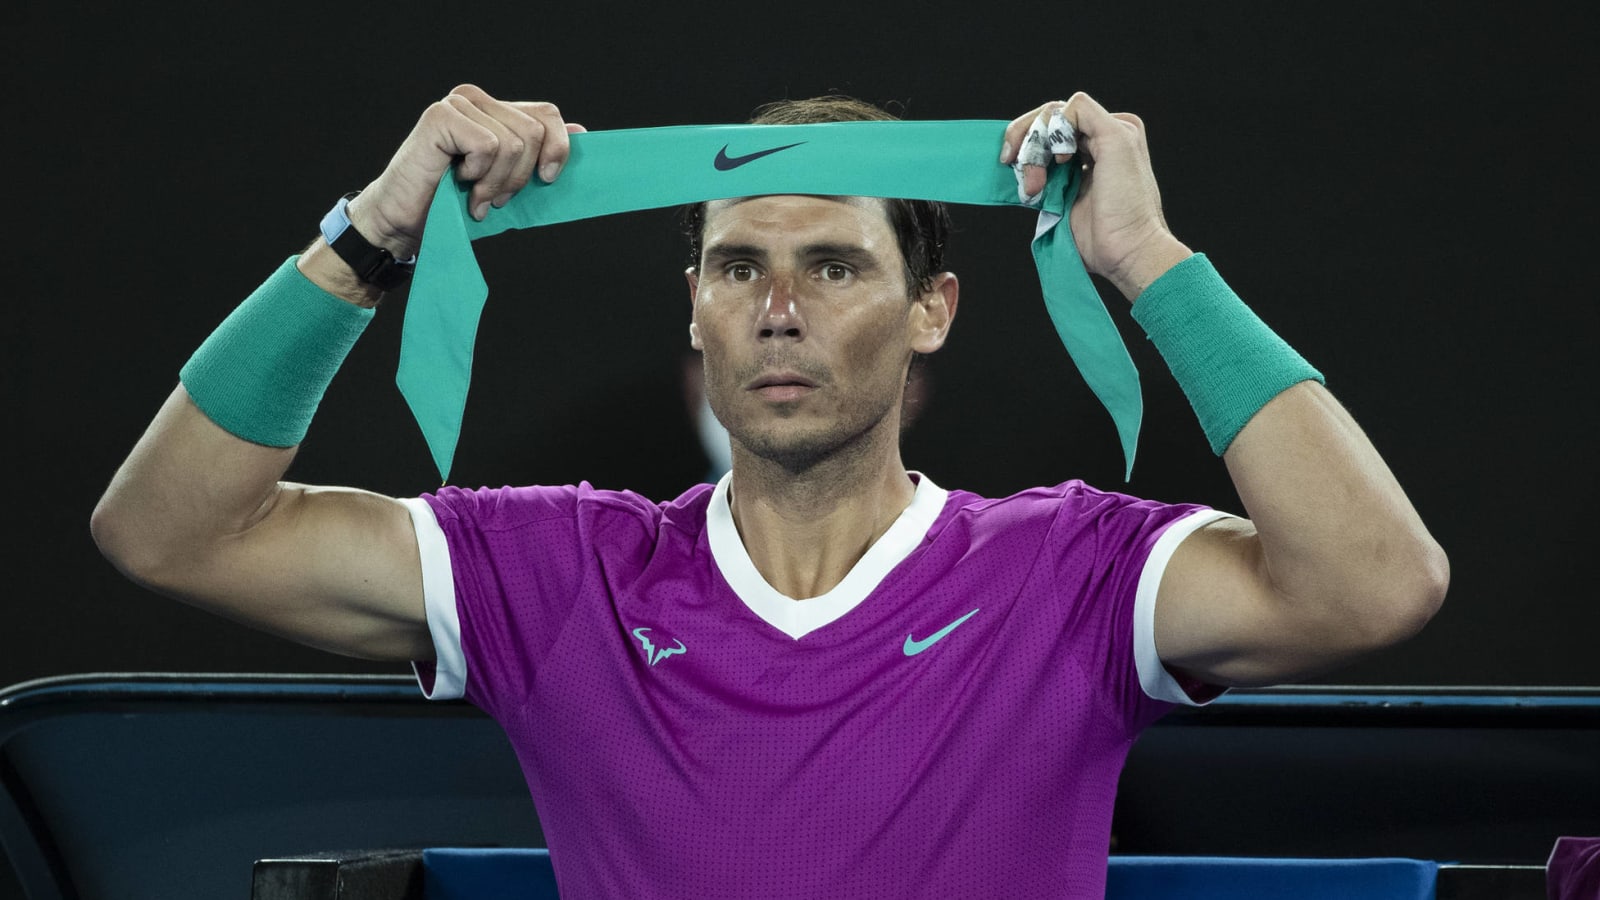 Nadal has chance to break Grand Slam record at Aussie Open